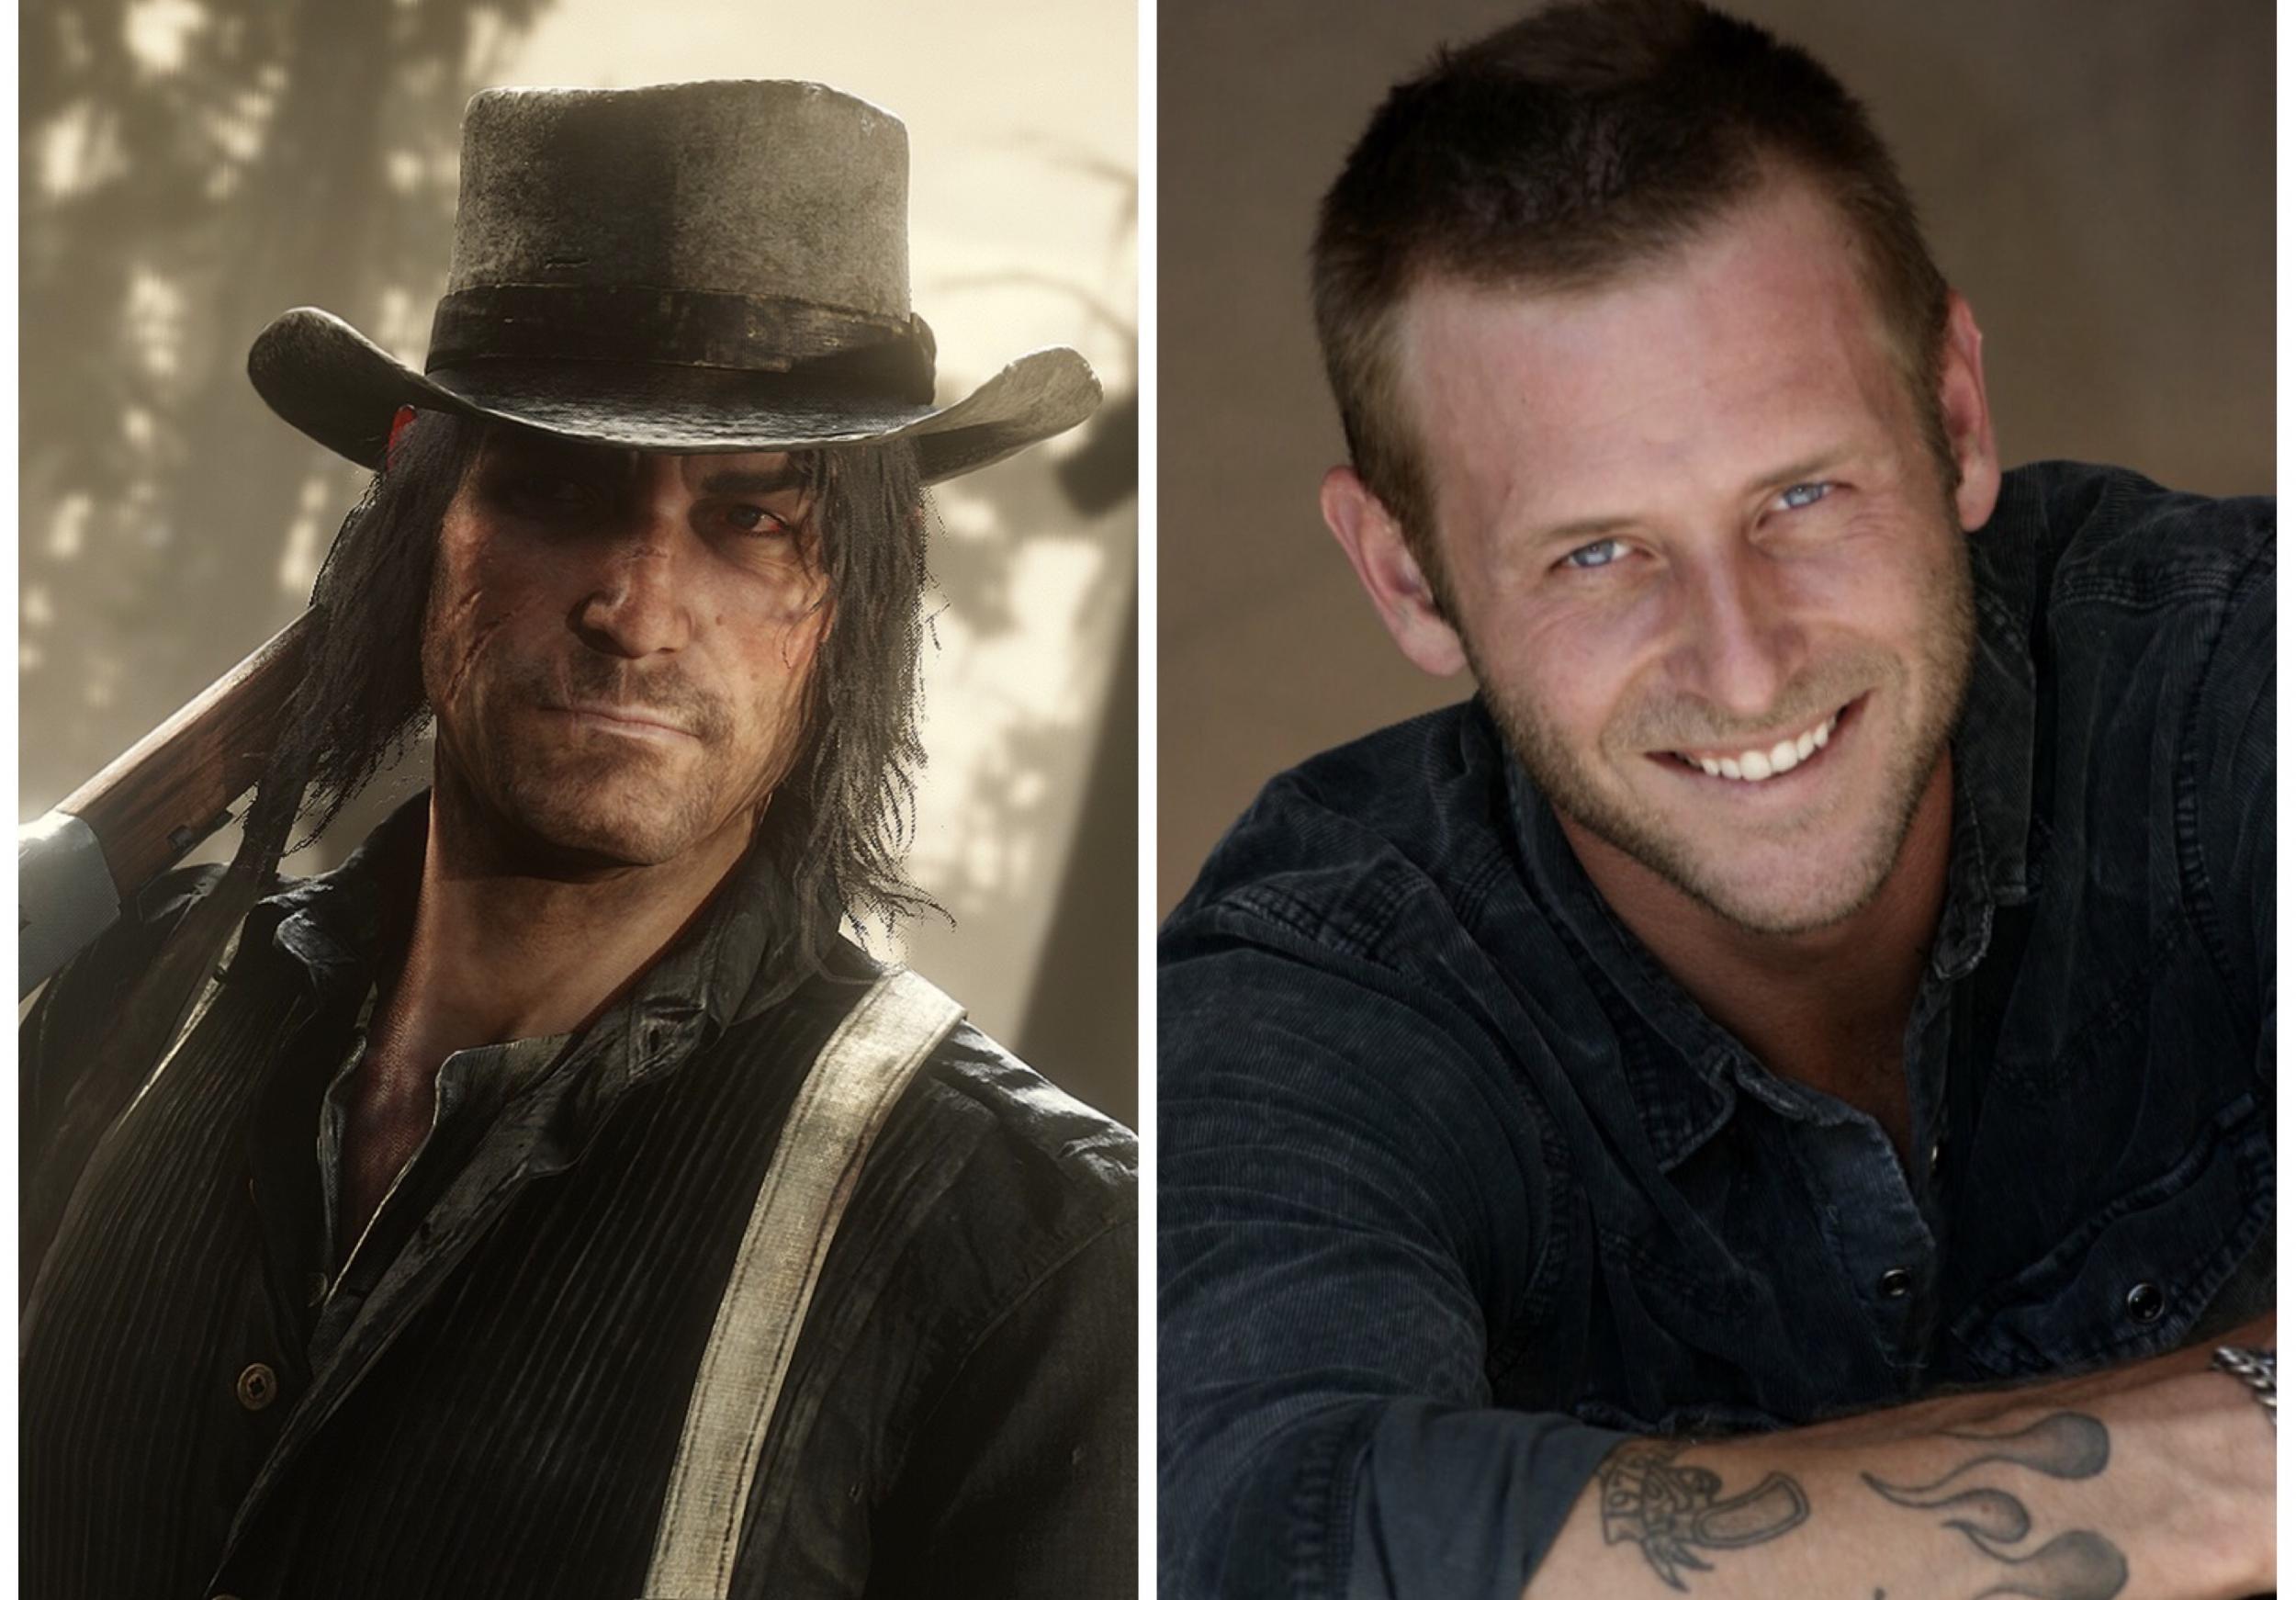 Red Dead Redemption 2 cast: Meet the actors behind the band of outlaws | The Independent The Independent